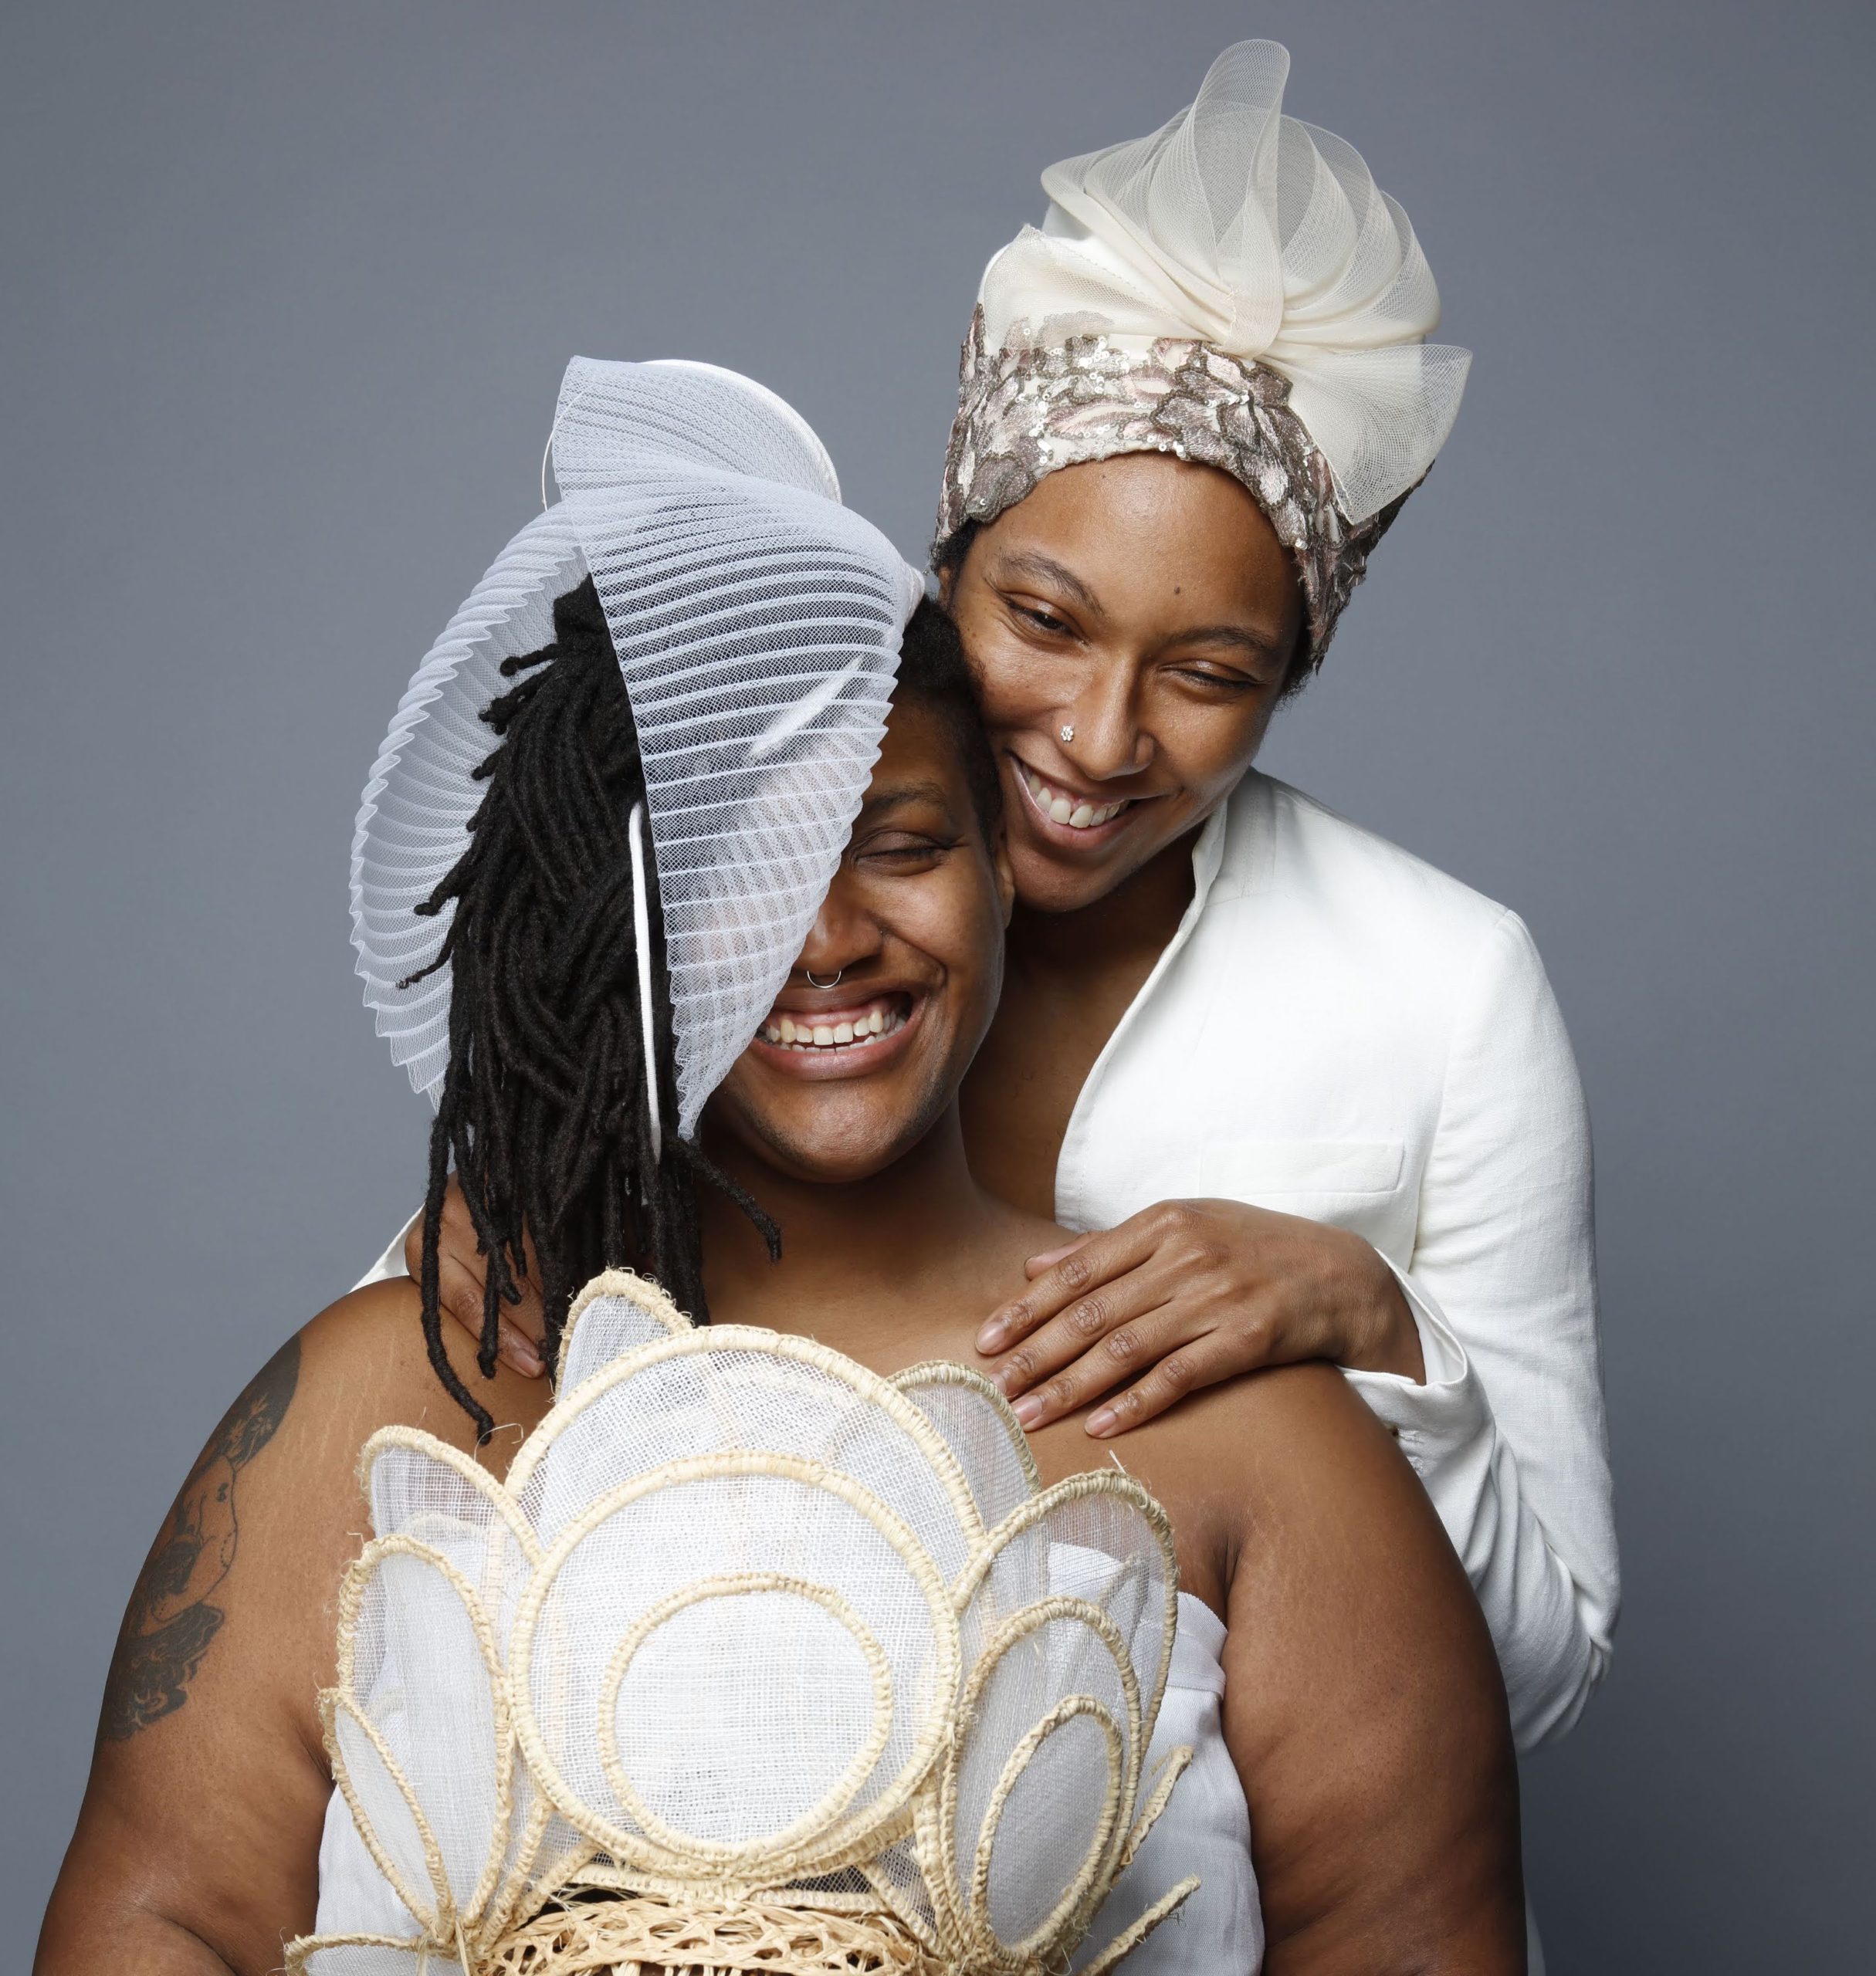 Two medium dark skinned people smile brightly, their eyes crinkling from laughter. Omolara stands behind Najee pressing O's cheek to Najee's head. They are adorned with white and cream sculptural head wear.